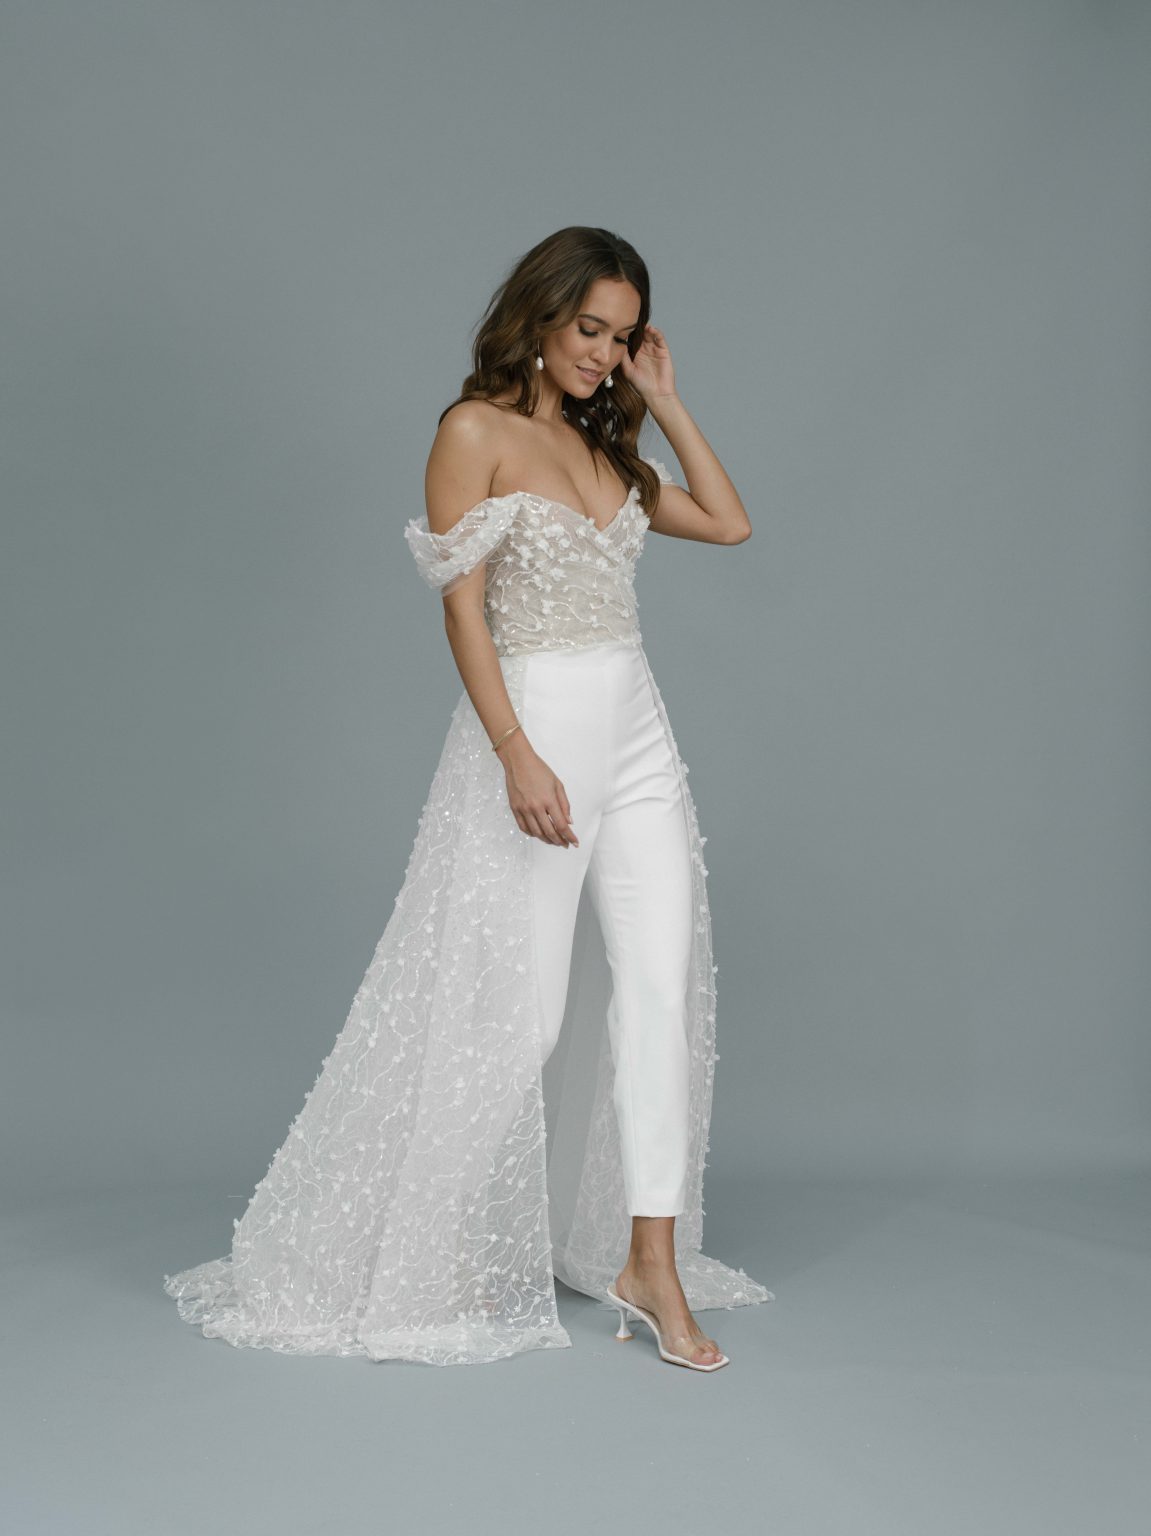 Mus Premedicatie Slepen 11 Chic Jumpsuits For The Fashion-Forward Bride - Wedding Journal